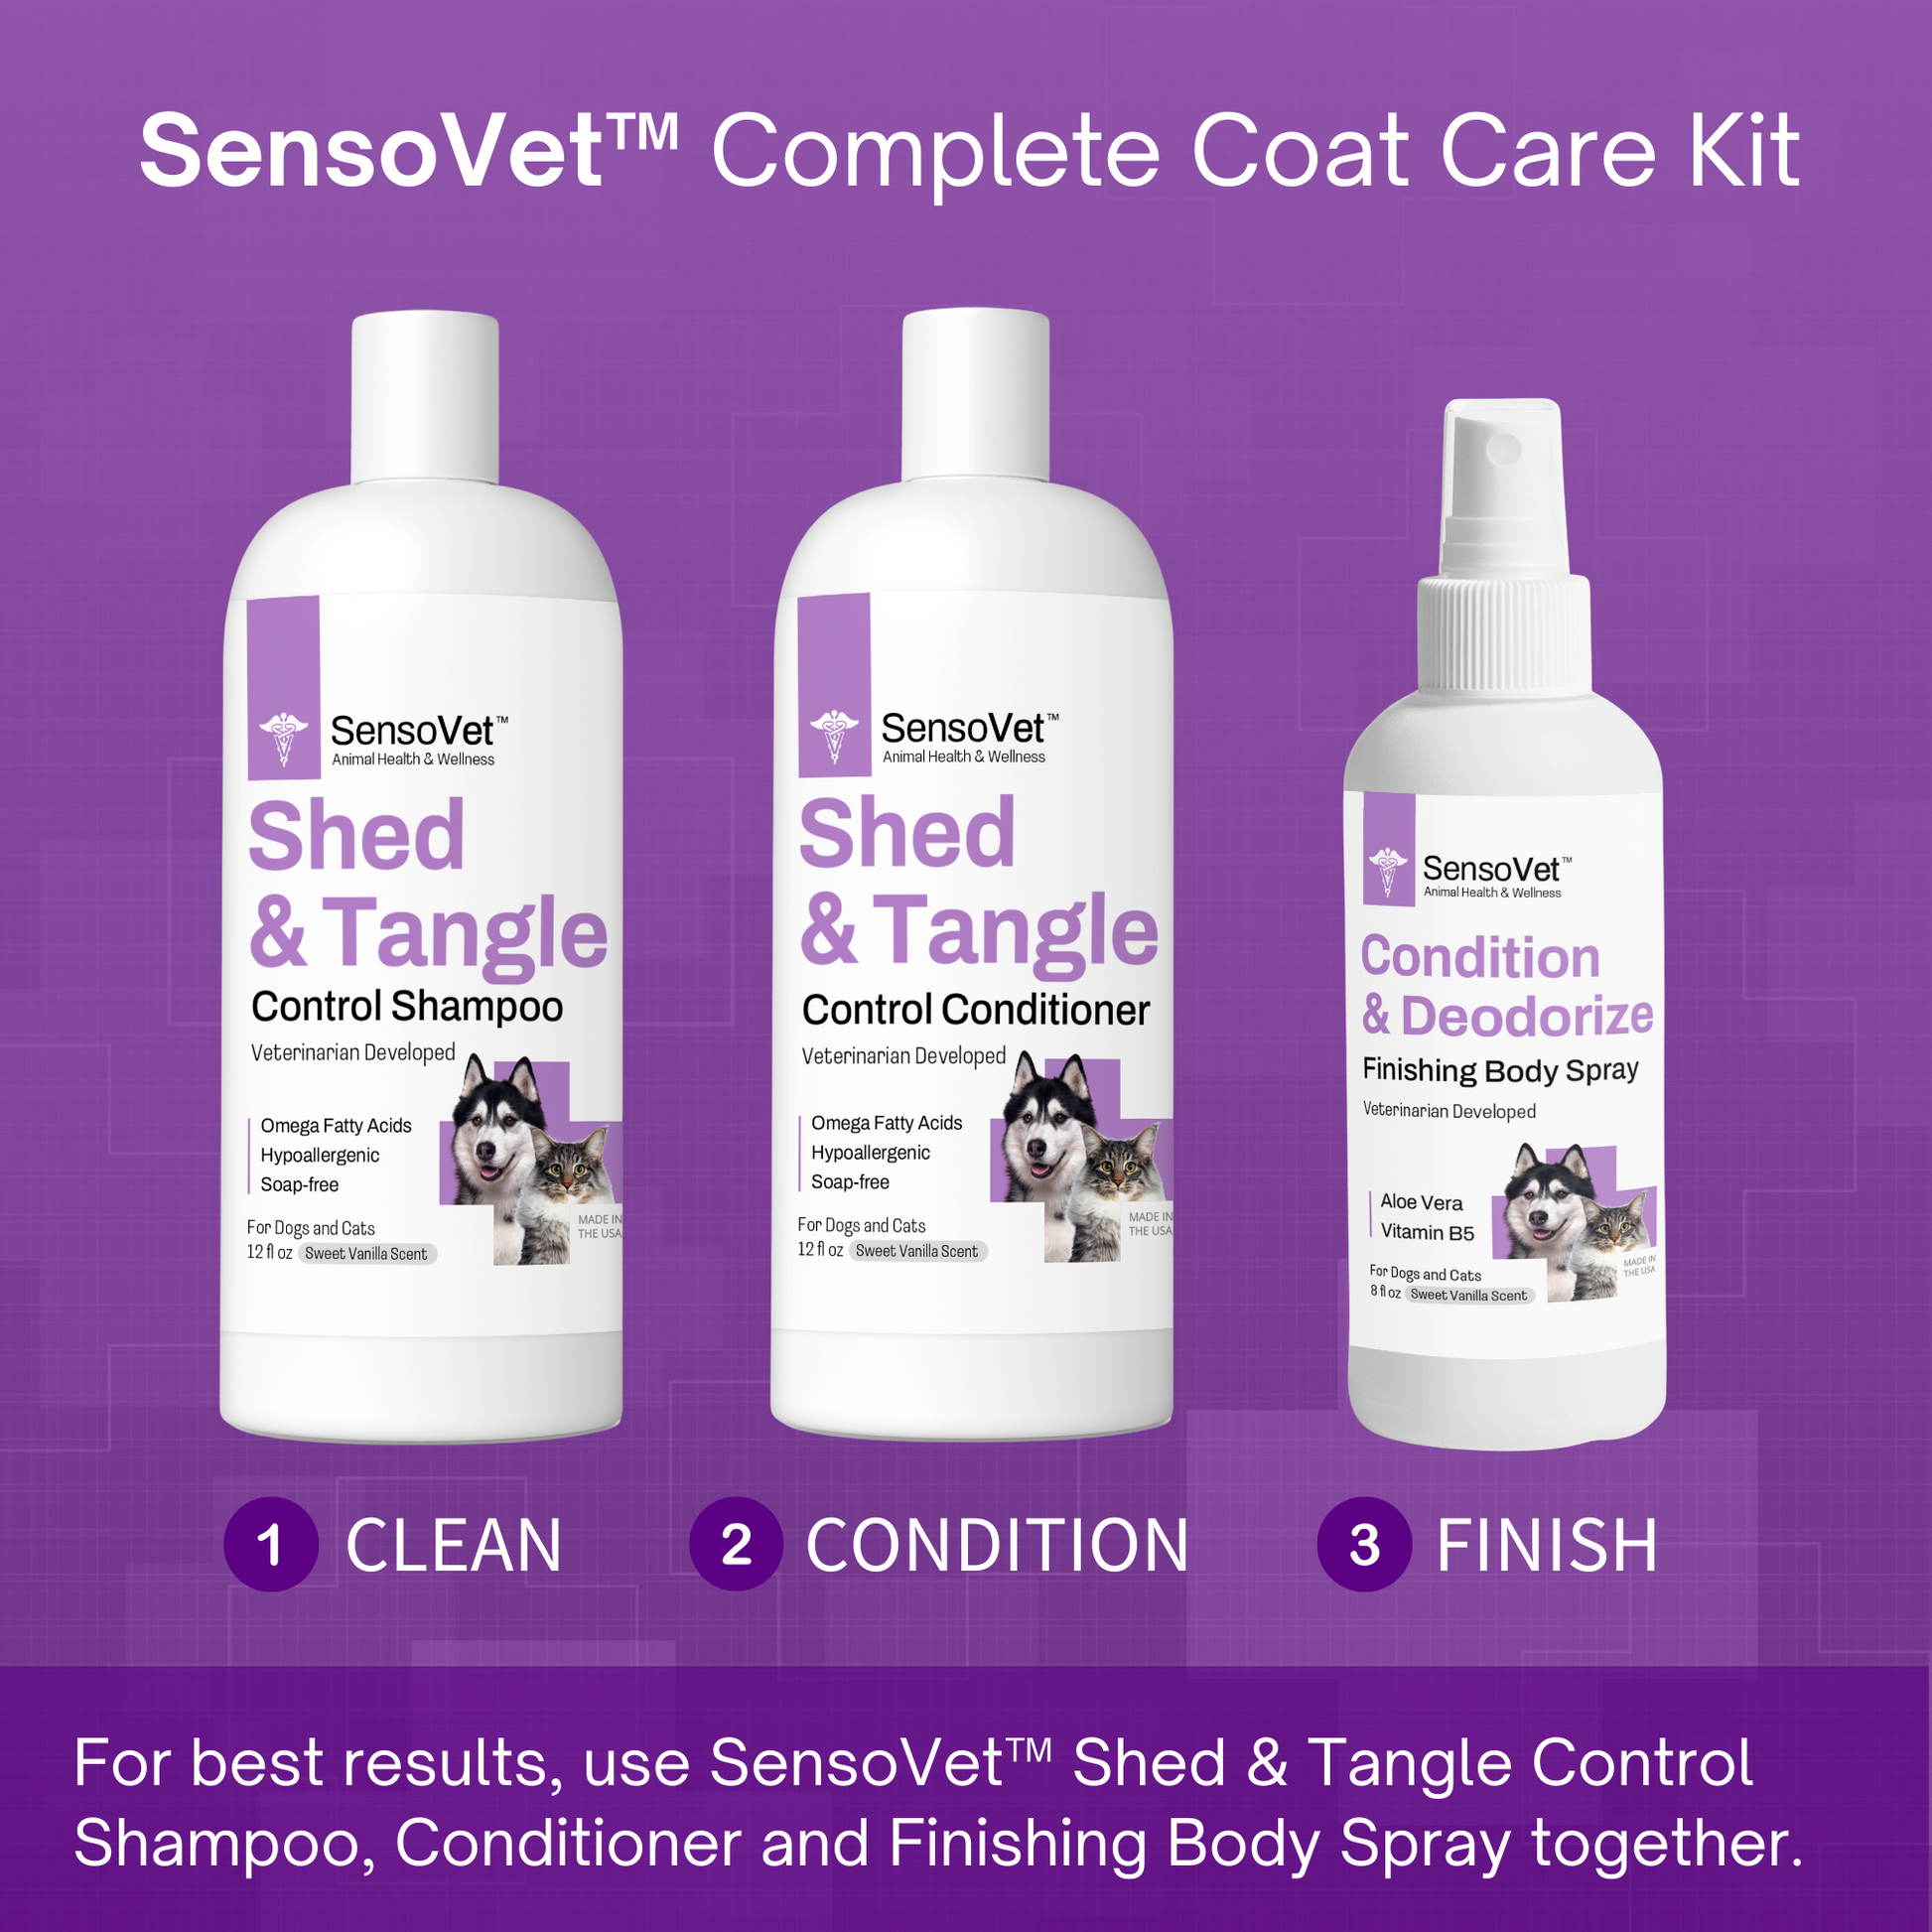 SensoVet Complete coat care kit - for best results, use our shed & tangle control shampoo, conditioner and finishing body spray together